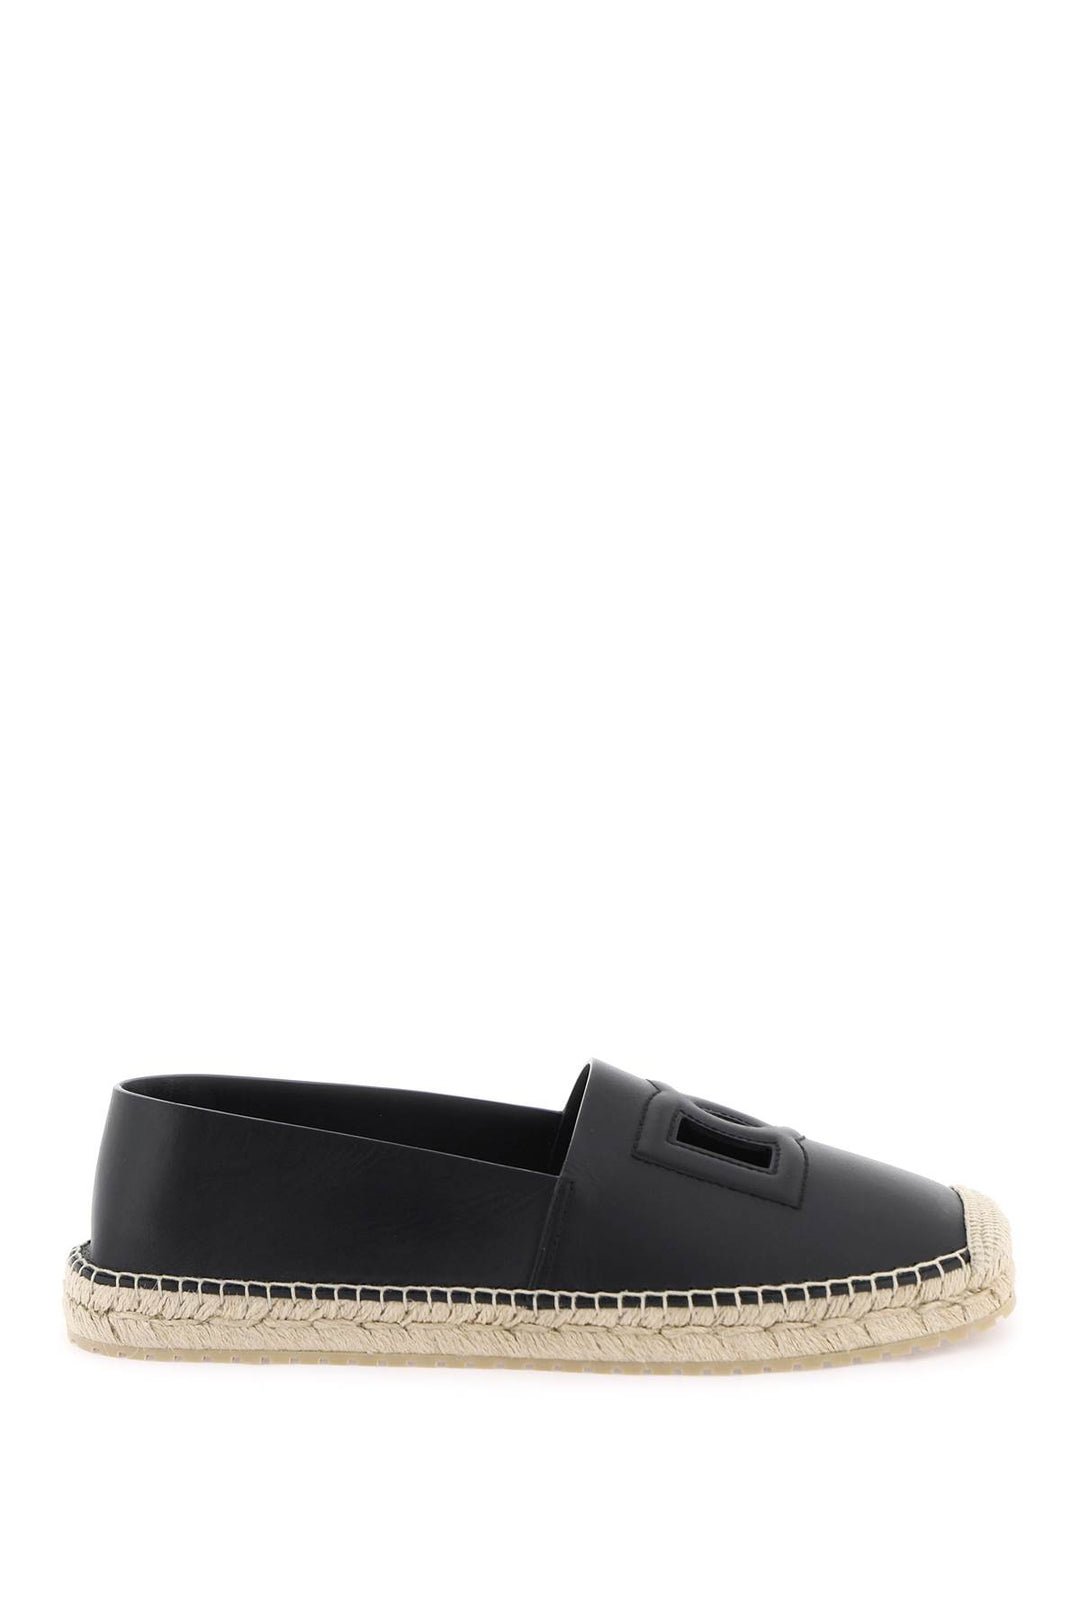 Dolce & Gabbana Leather Espadrilles With Dg Logo And   Black